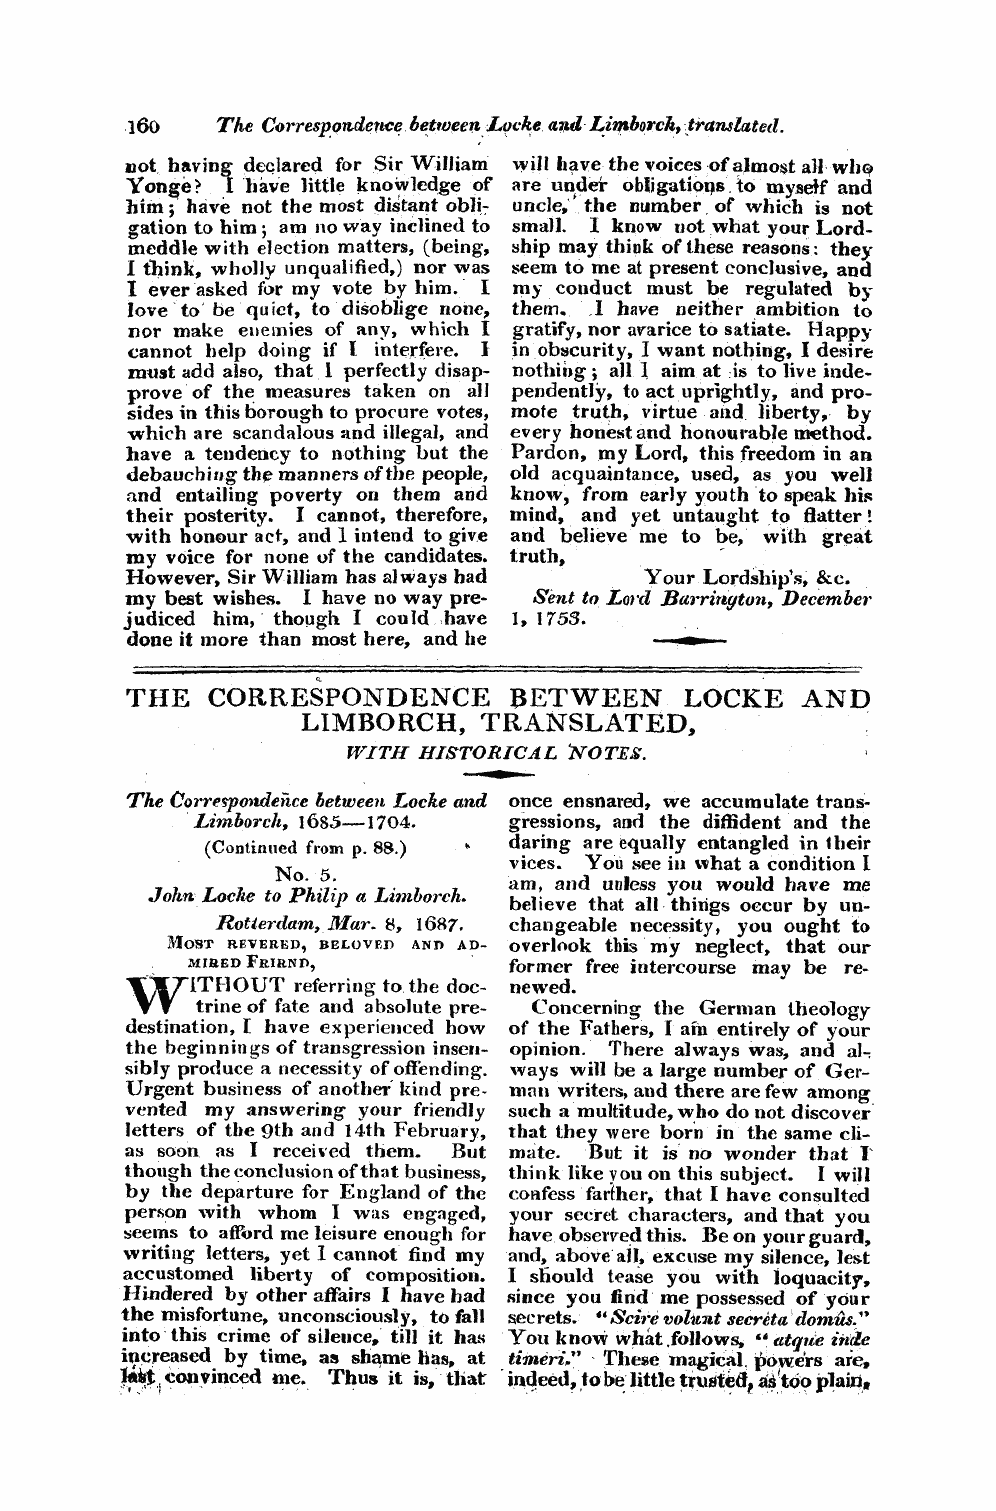 Monthly Repository (1806-1838) and Unitarian Chronicle (1832-1833): F Y, 1st edition - The Correspondence Between Locke And Limborch, Translated, With Historical 'Notes.